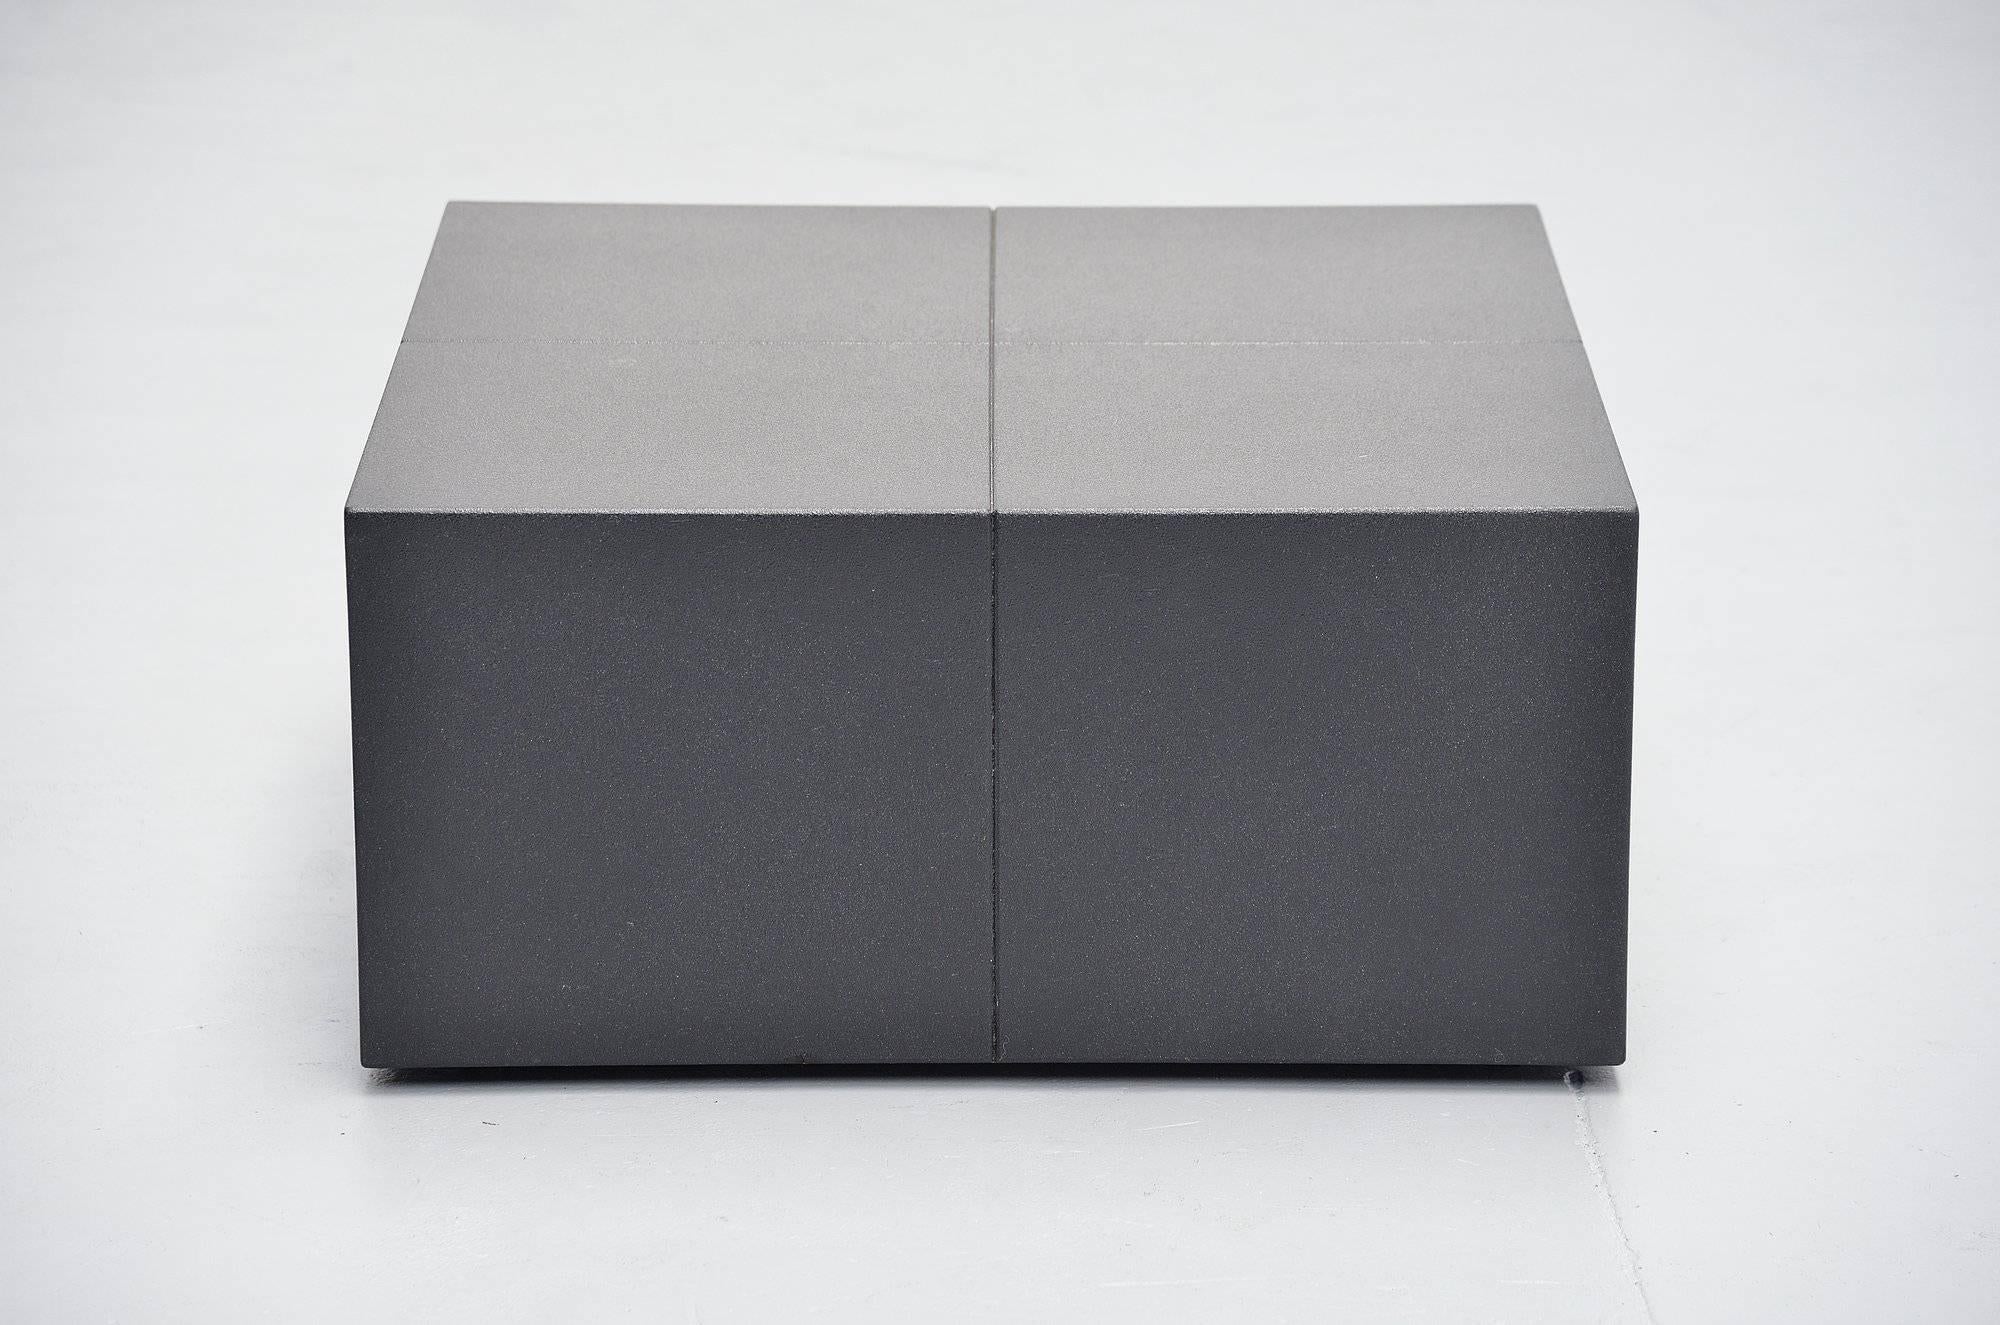 Cold-Painted Claire Bataille Paul Ibens Coffee Table 't Spectrum, 1973